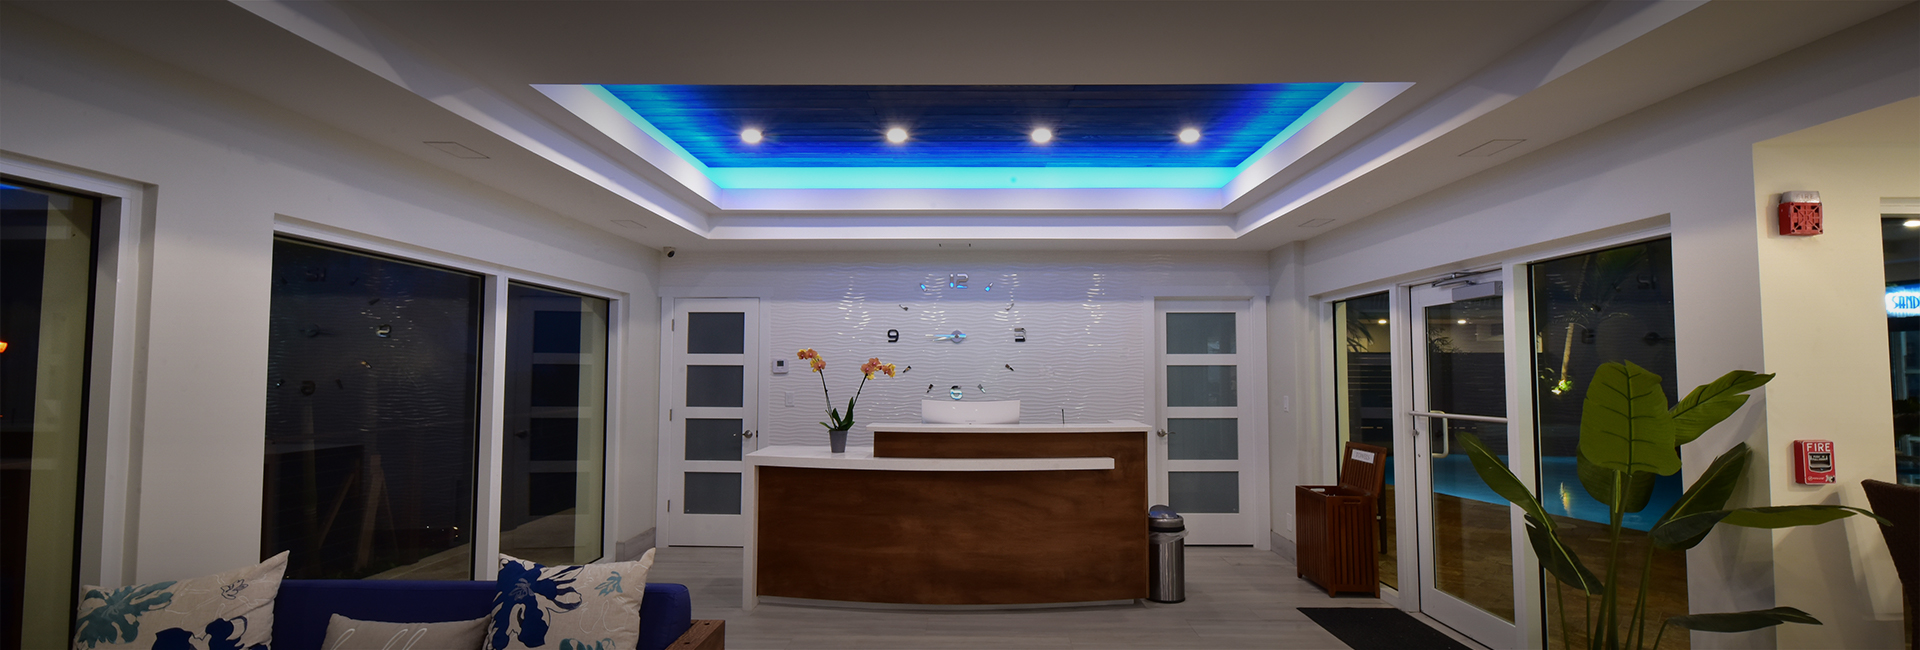 receptionist desk with modern decor with wooden accents